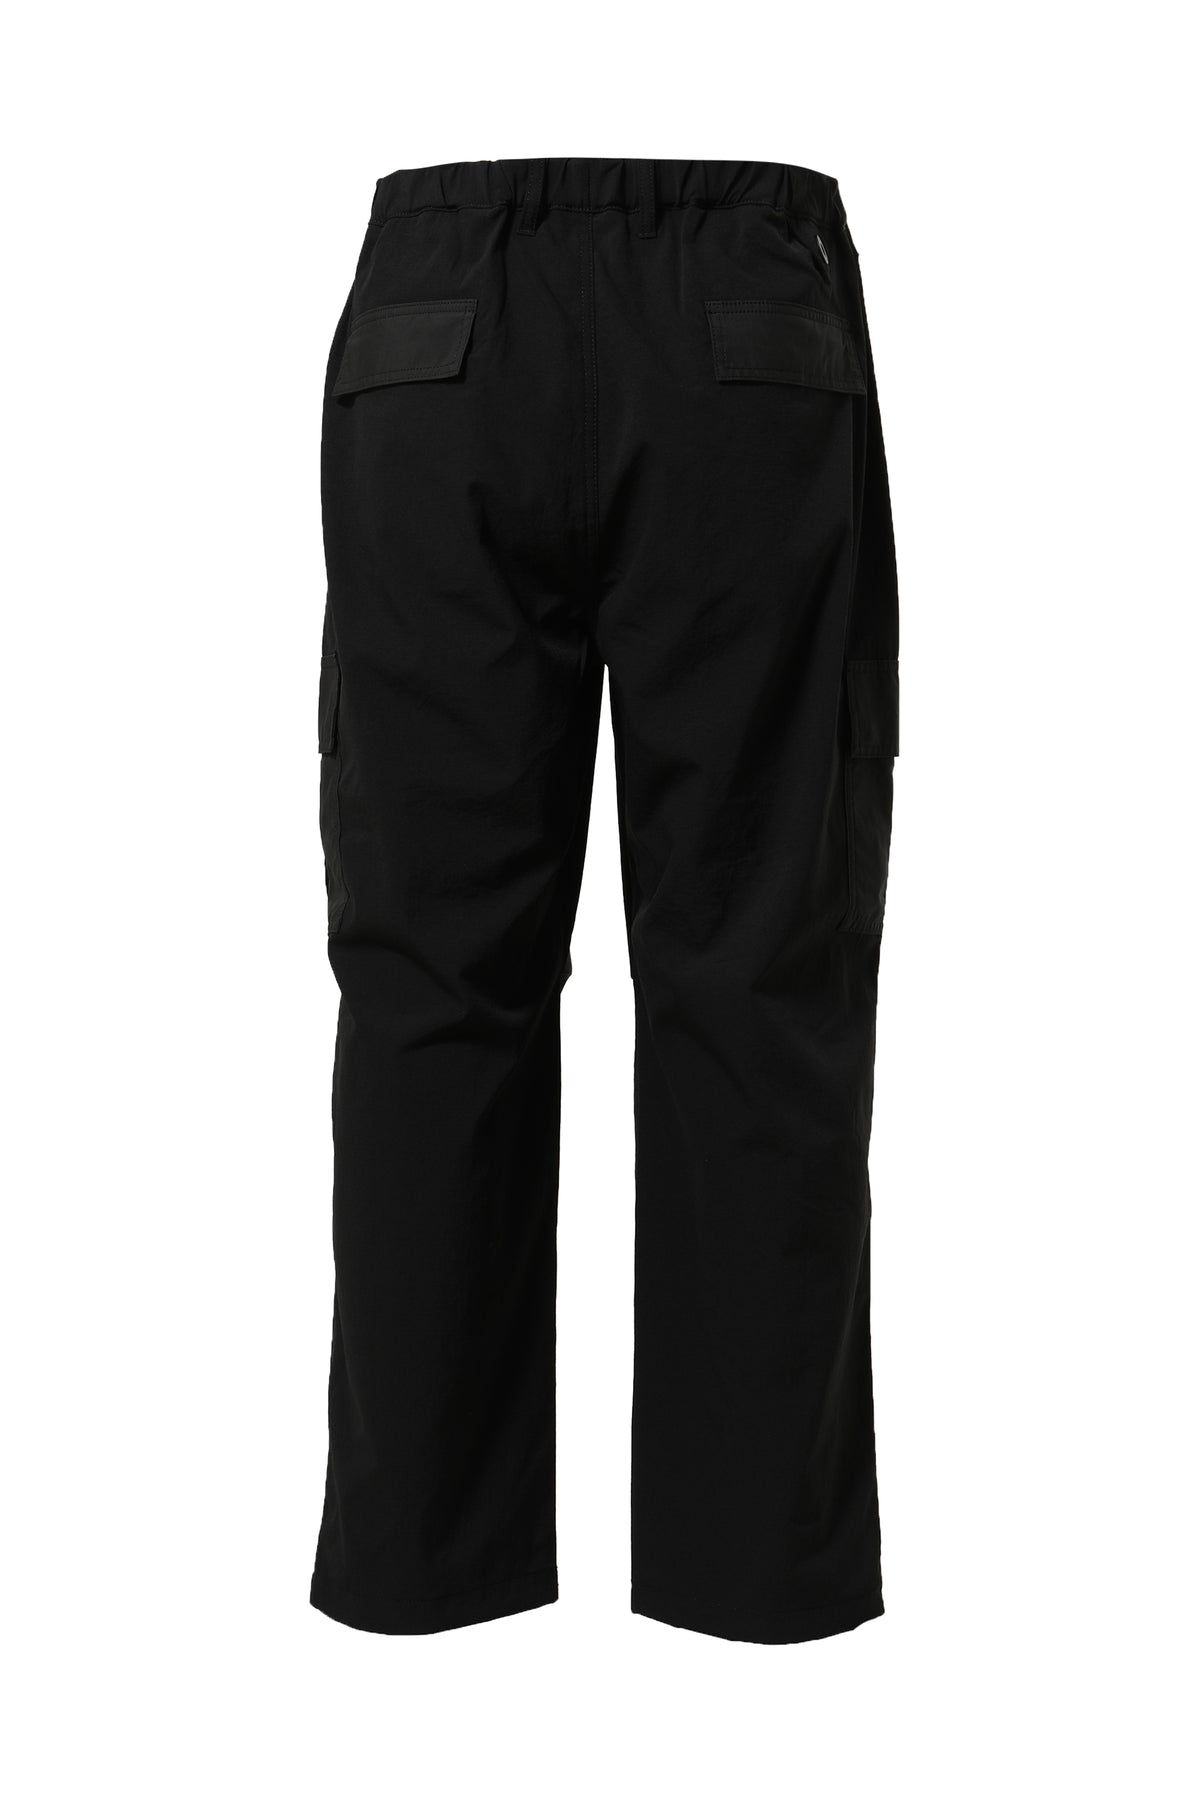 POST ARCHIVE FACTION SS23 5.0+ TROUSERS RIGHT / BLK -NUBIAN